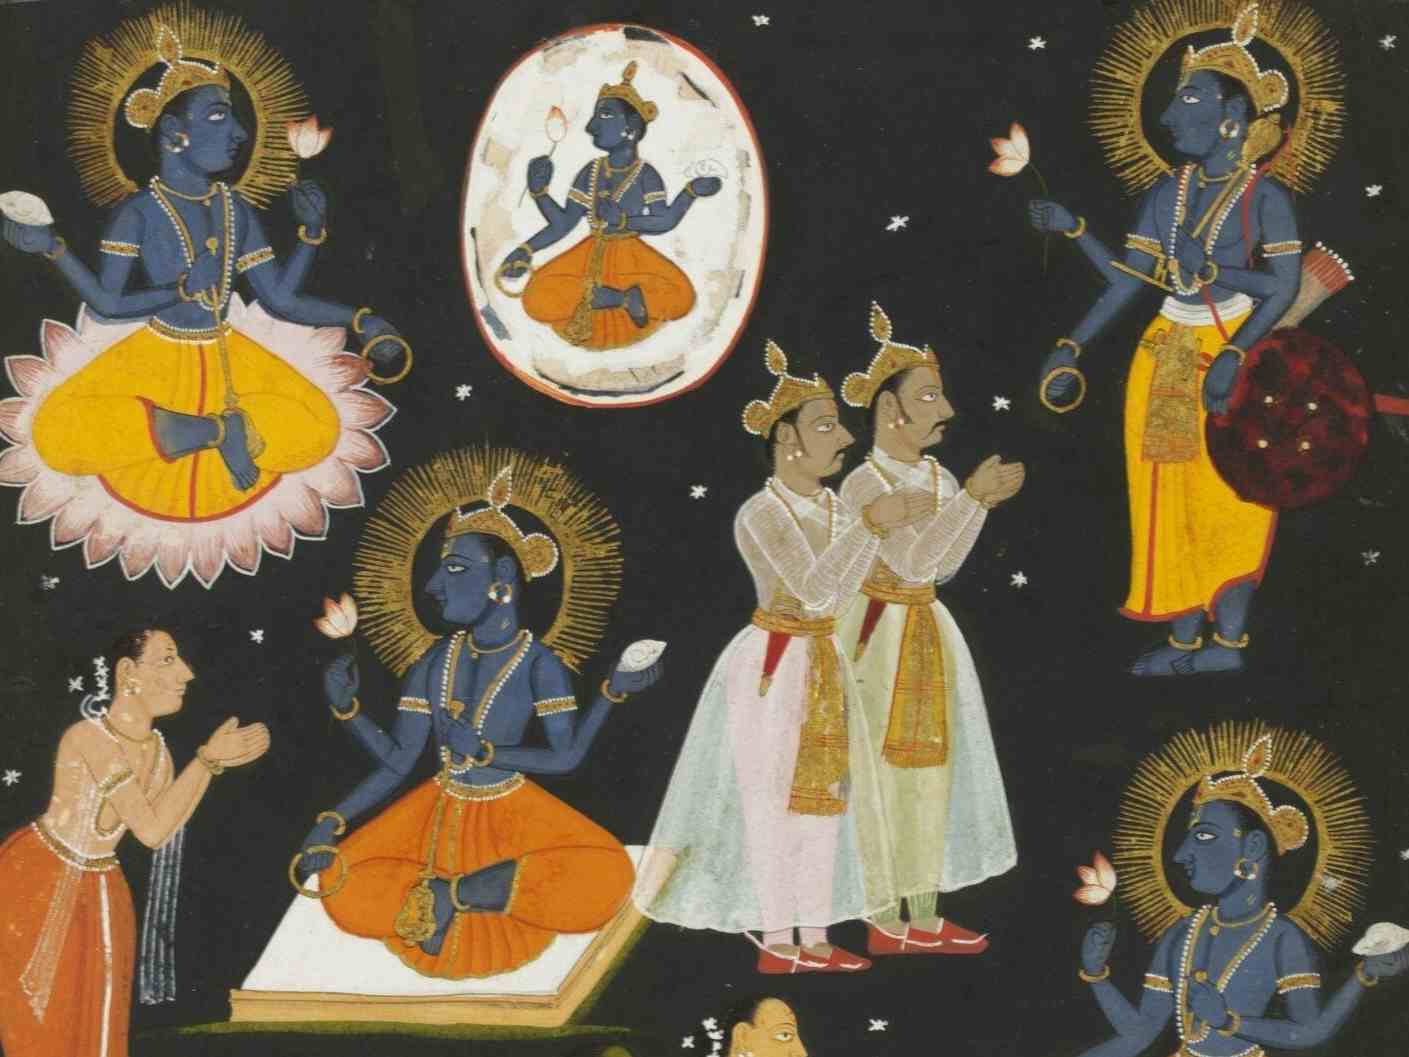 Vishnu ca. 1690 (Victoria & Albert Museum): In this illustration to the Hindu text the 'Vishnu Sahasranama' (The Thousand Names of Vishnu), the god Vishnu is shown being worshipped in several forms at once by groups of devotees.